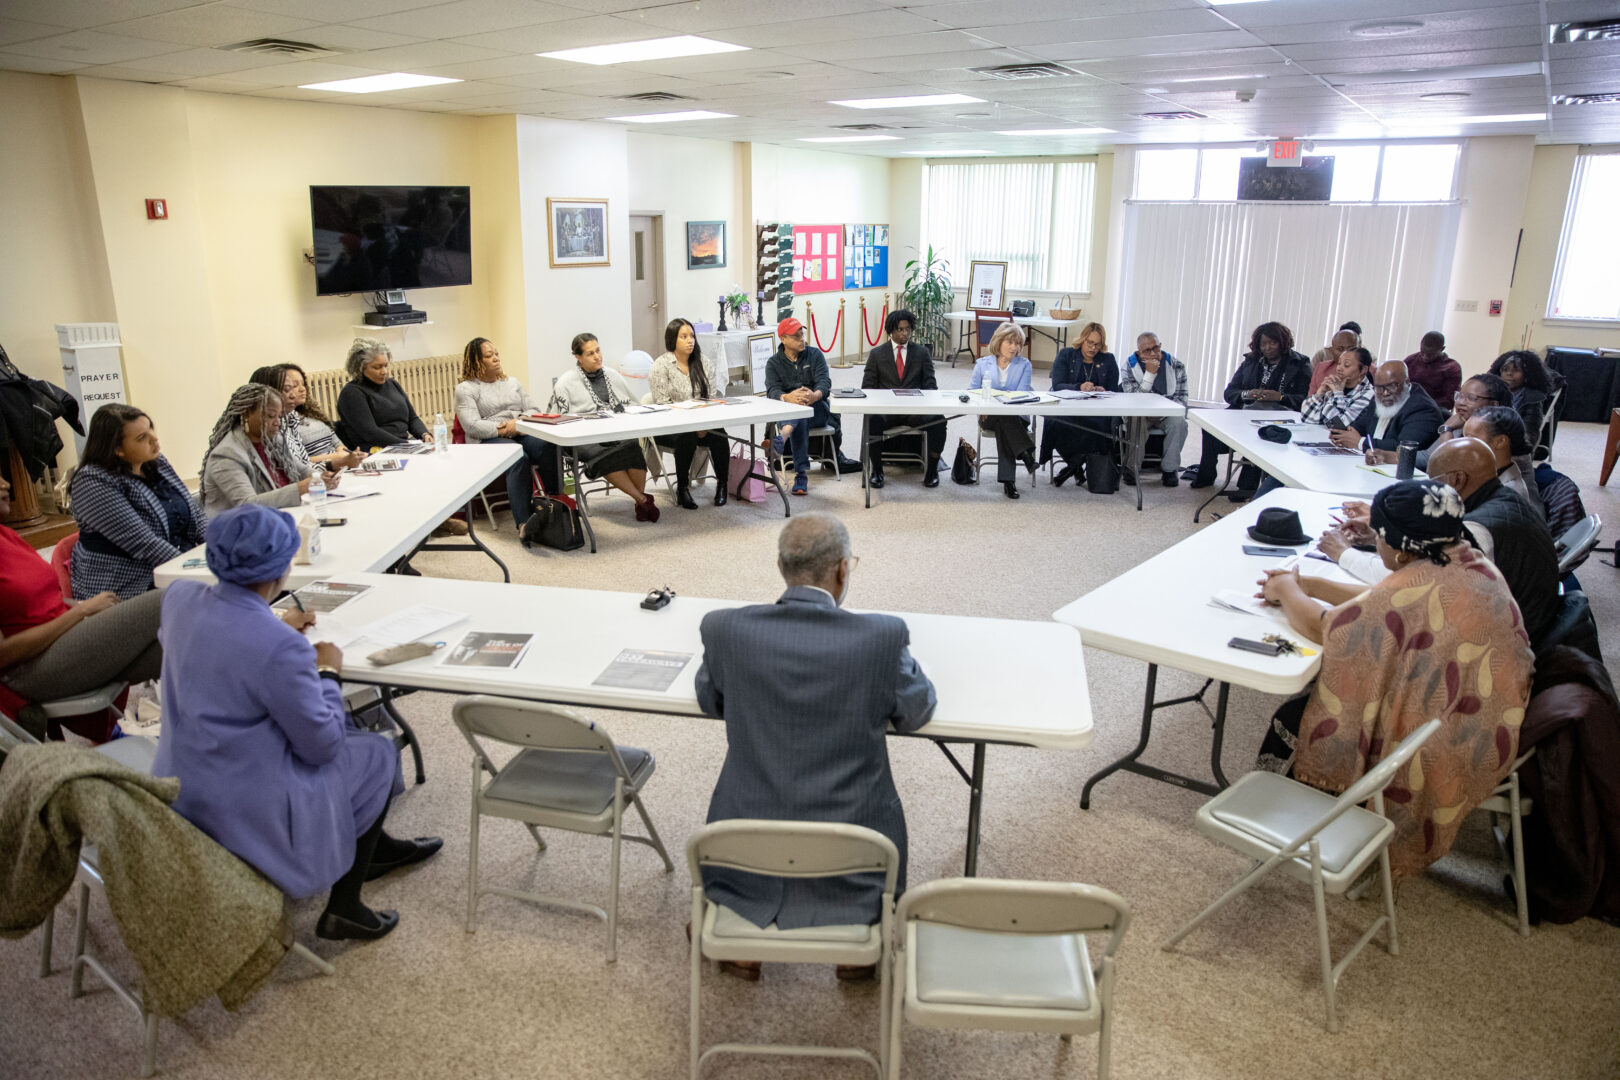 On March, Democratic Sen. Art Haywood held a community roundtable with community leader and business owners in Reading.
